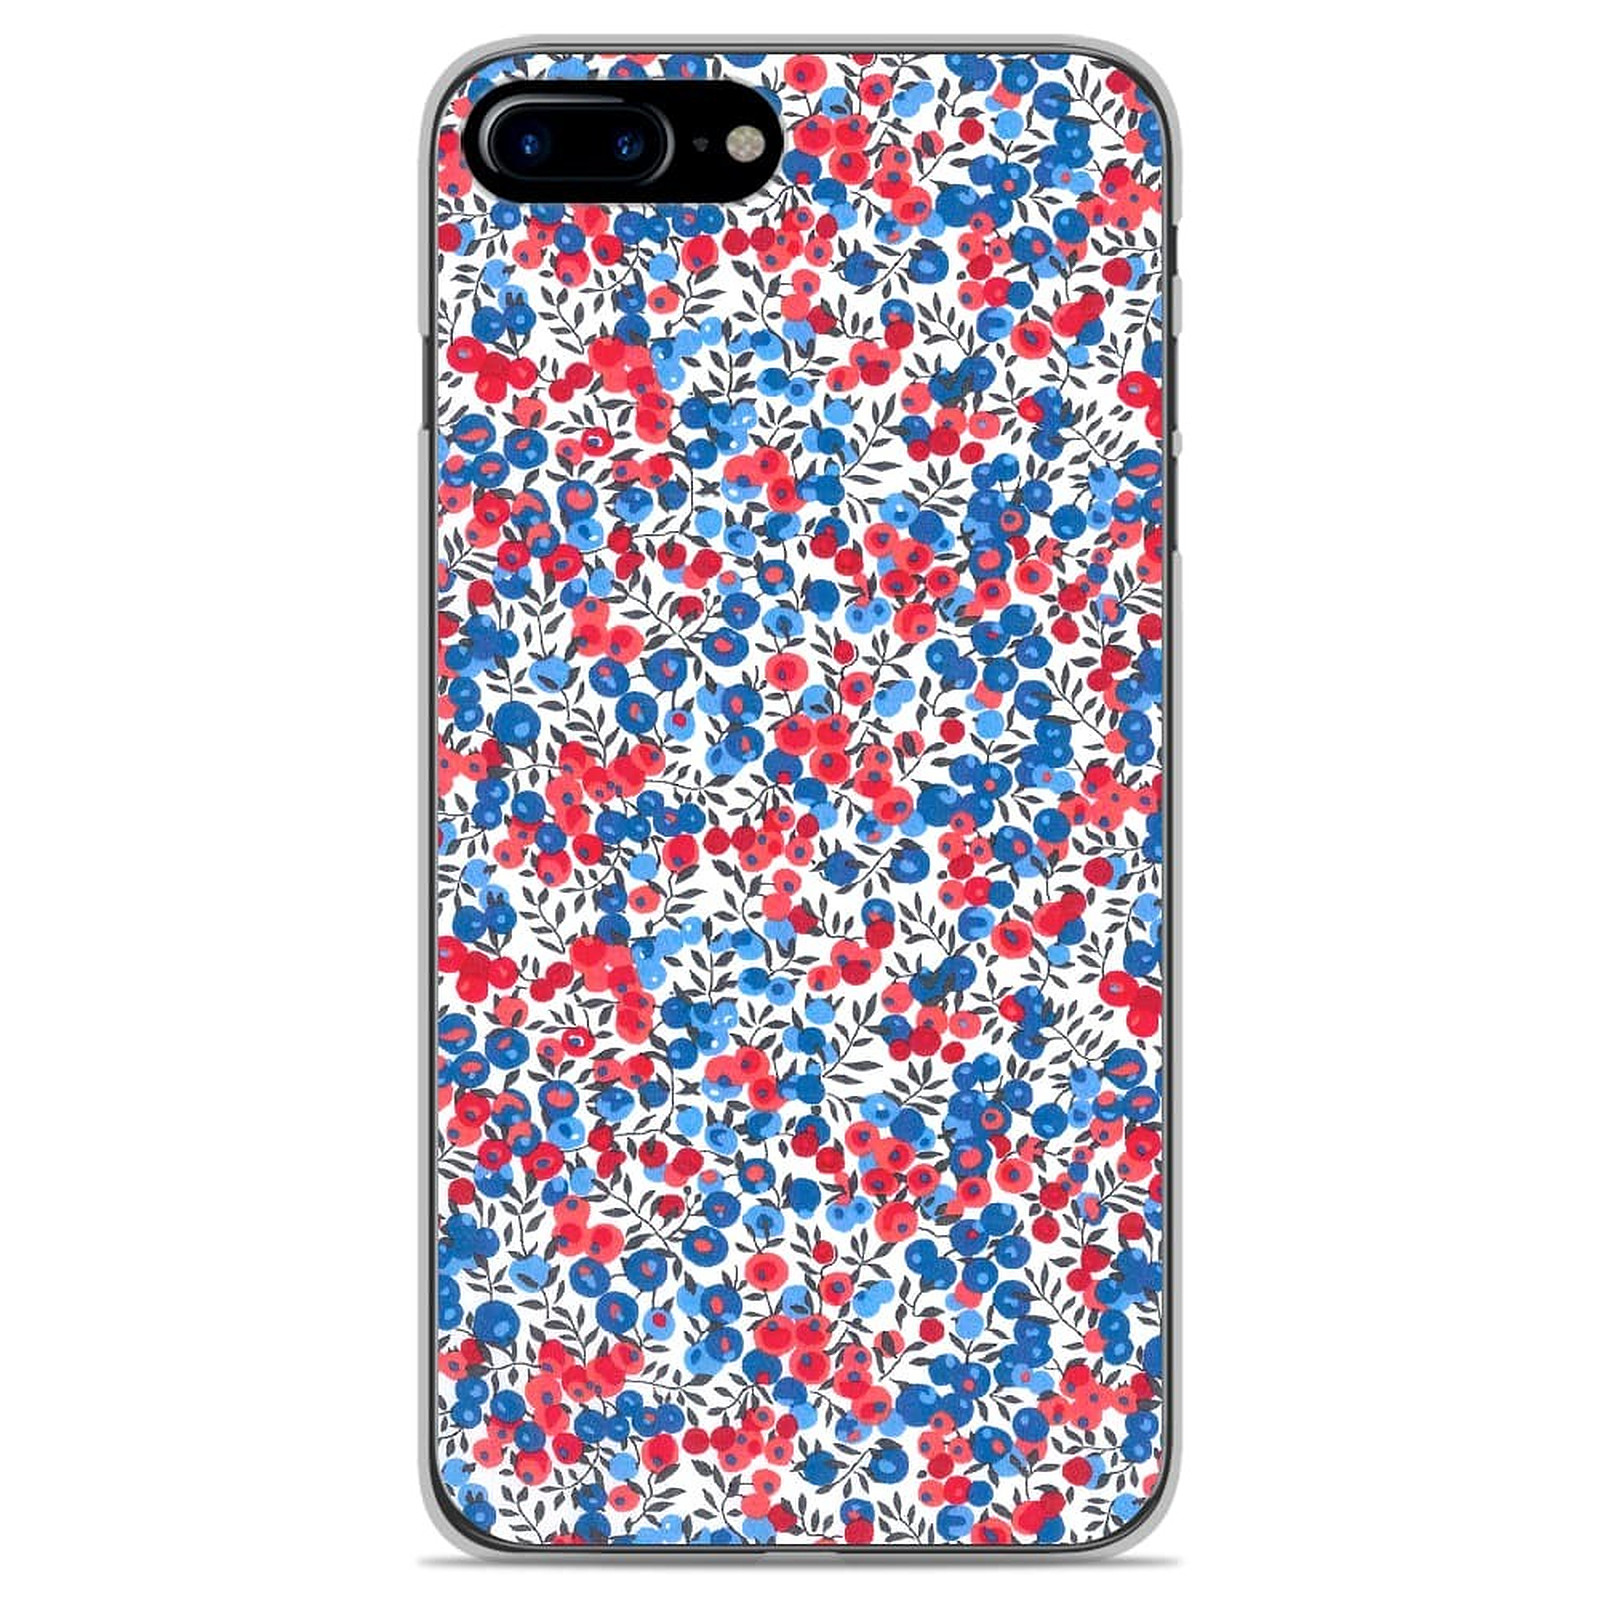 1001 Coques Coque silicone gel Apple iPhone 8 Plus motif Liberty Wiltshire Bleu - Coque telephone 1001Coques